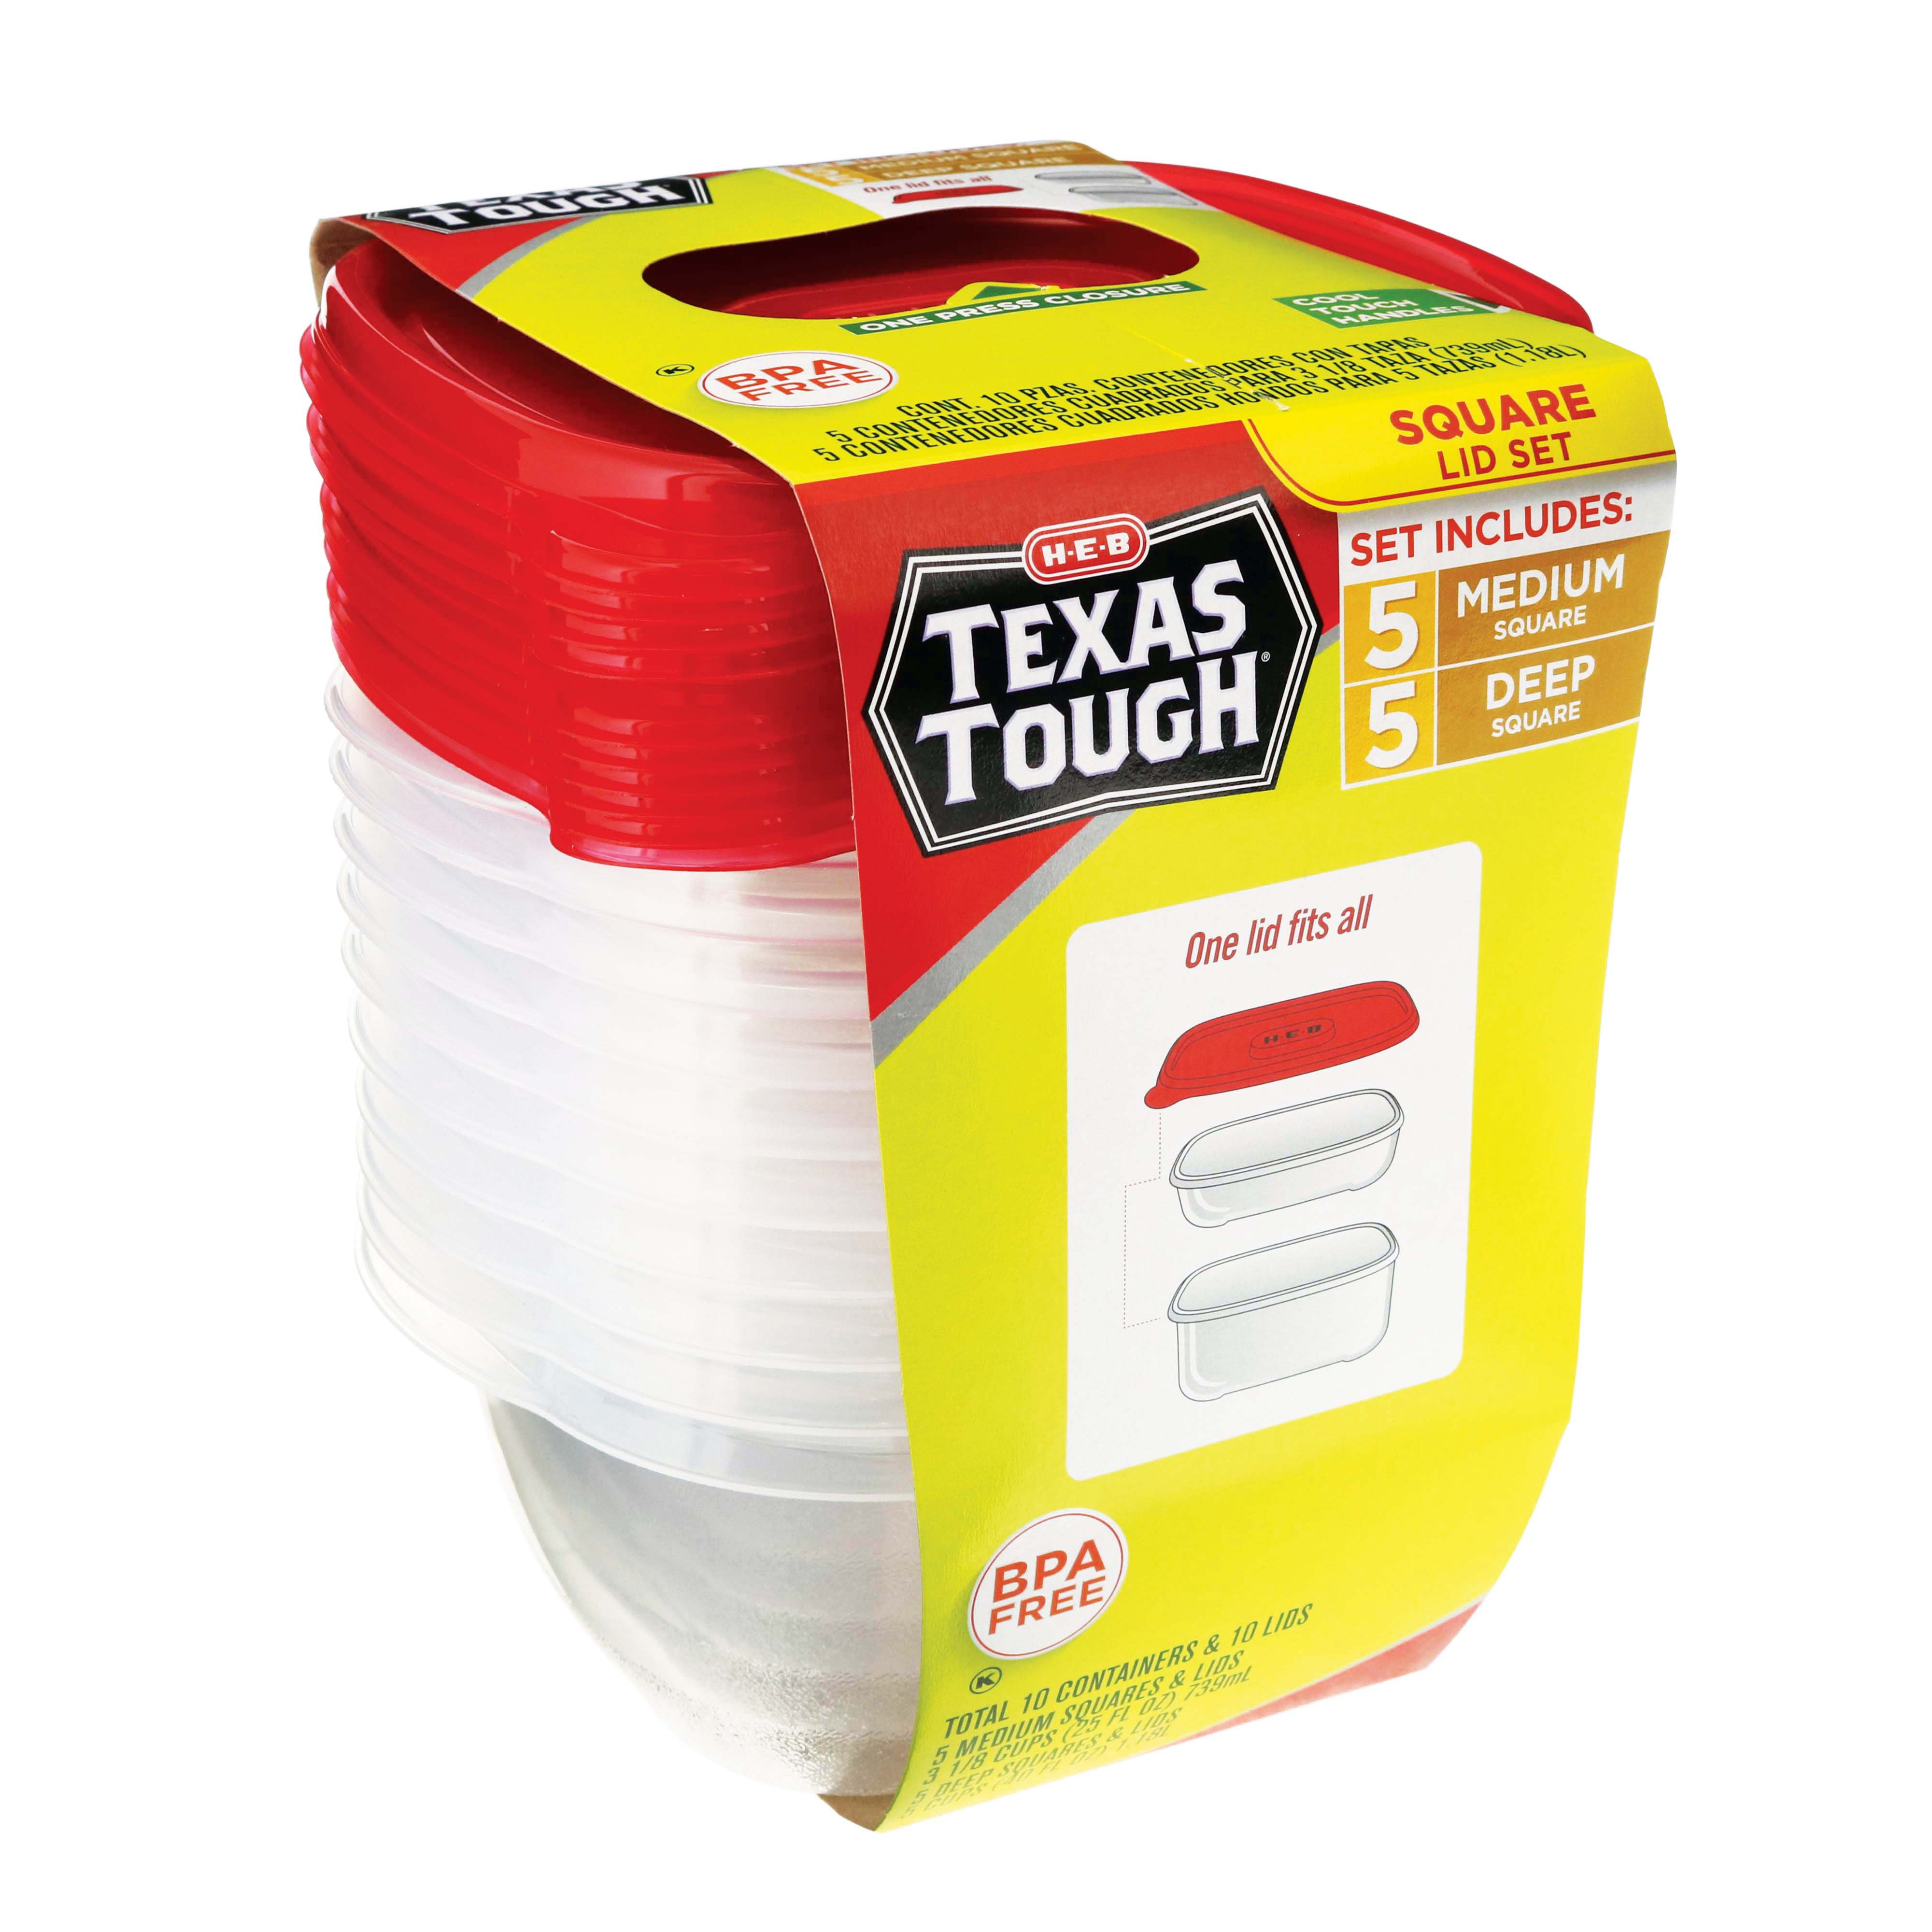 Rubbermaid Easy Find Lid Tabs Set - Shop Food Storage at H-E-B